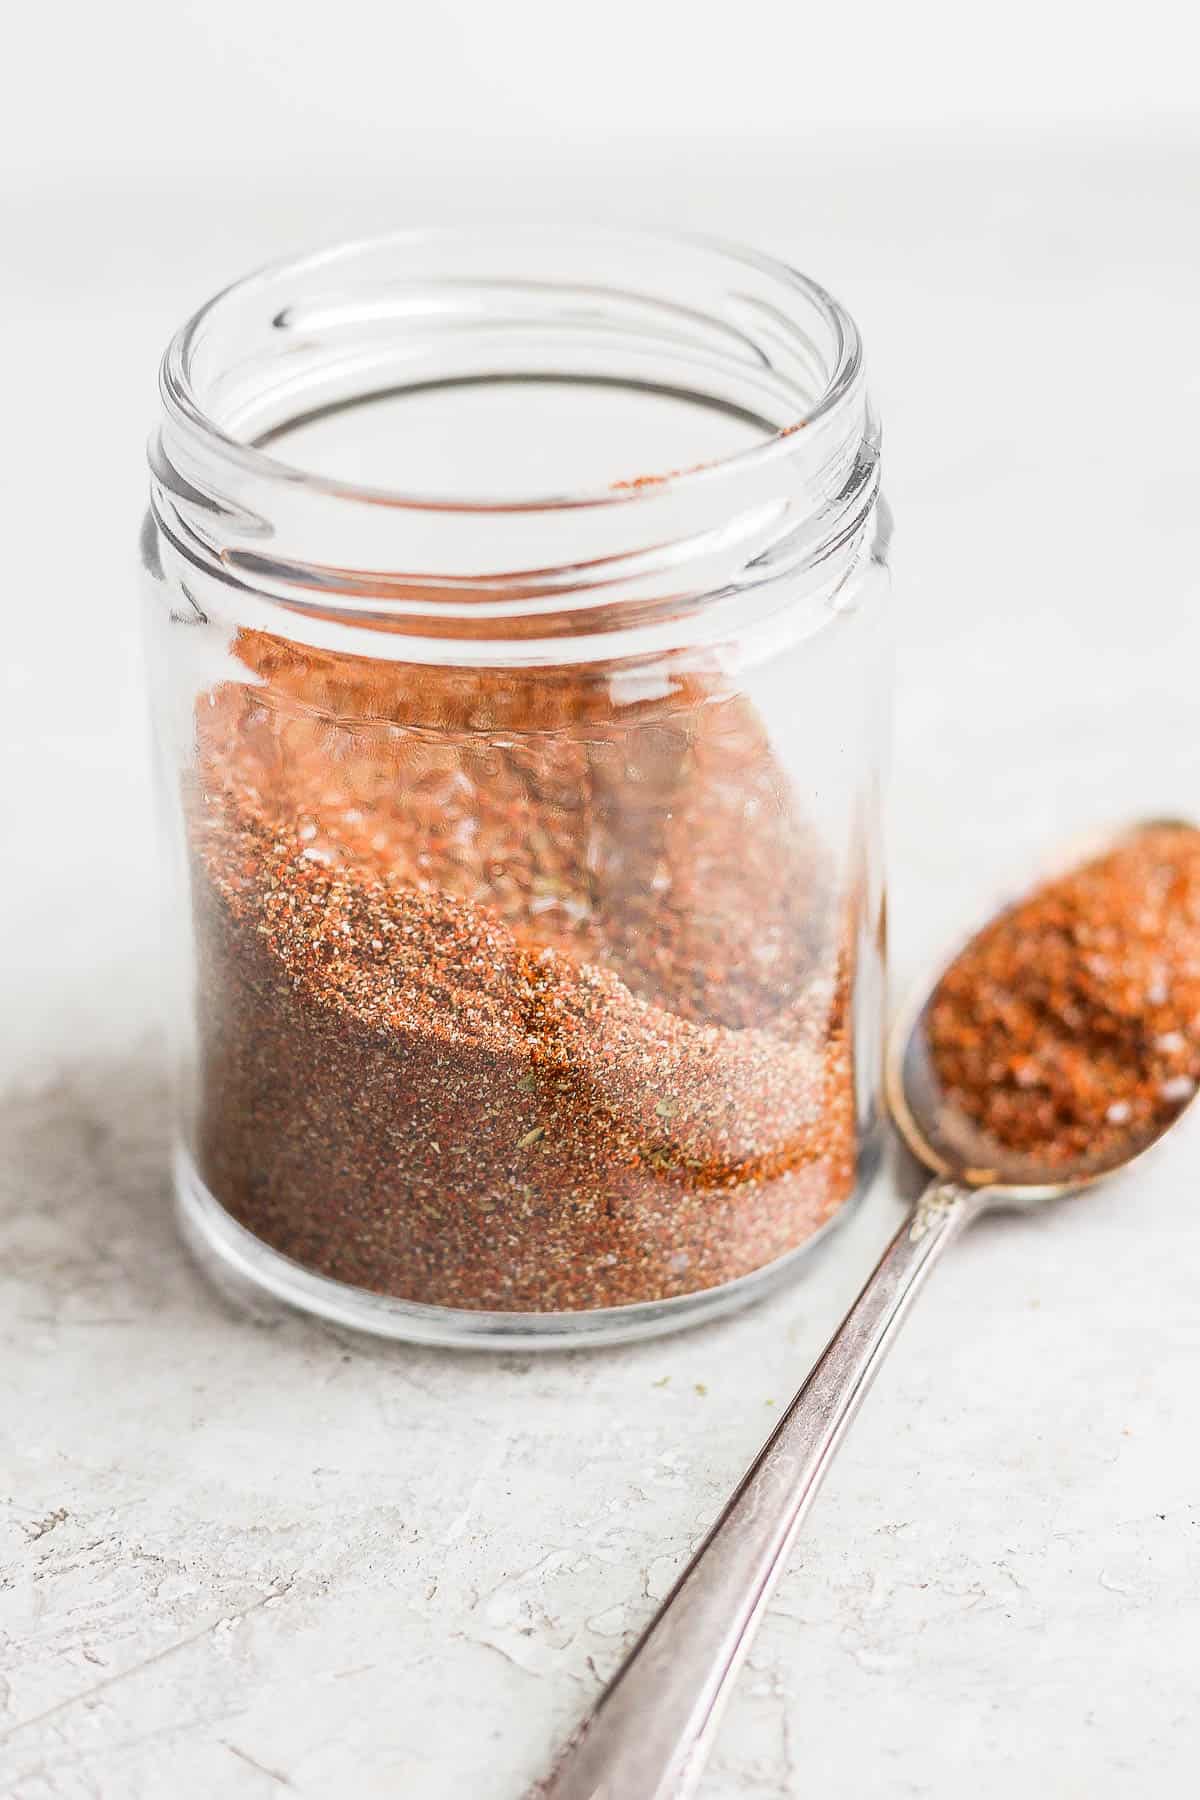 Homemade taco seasoning in a glass jar with a spoon on the side